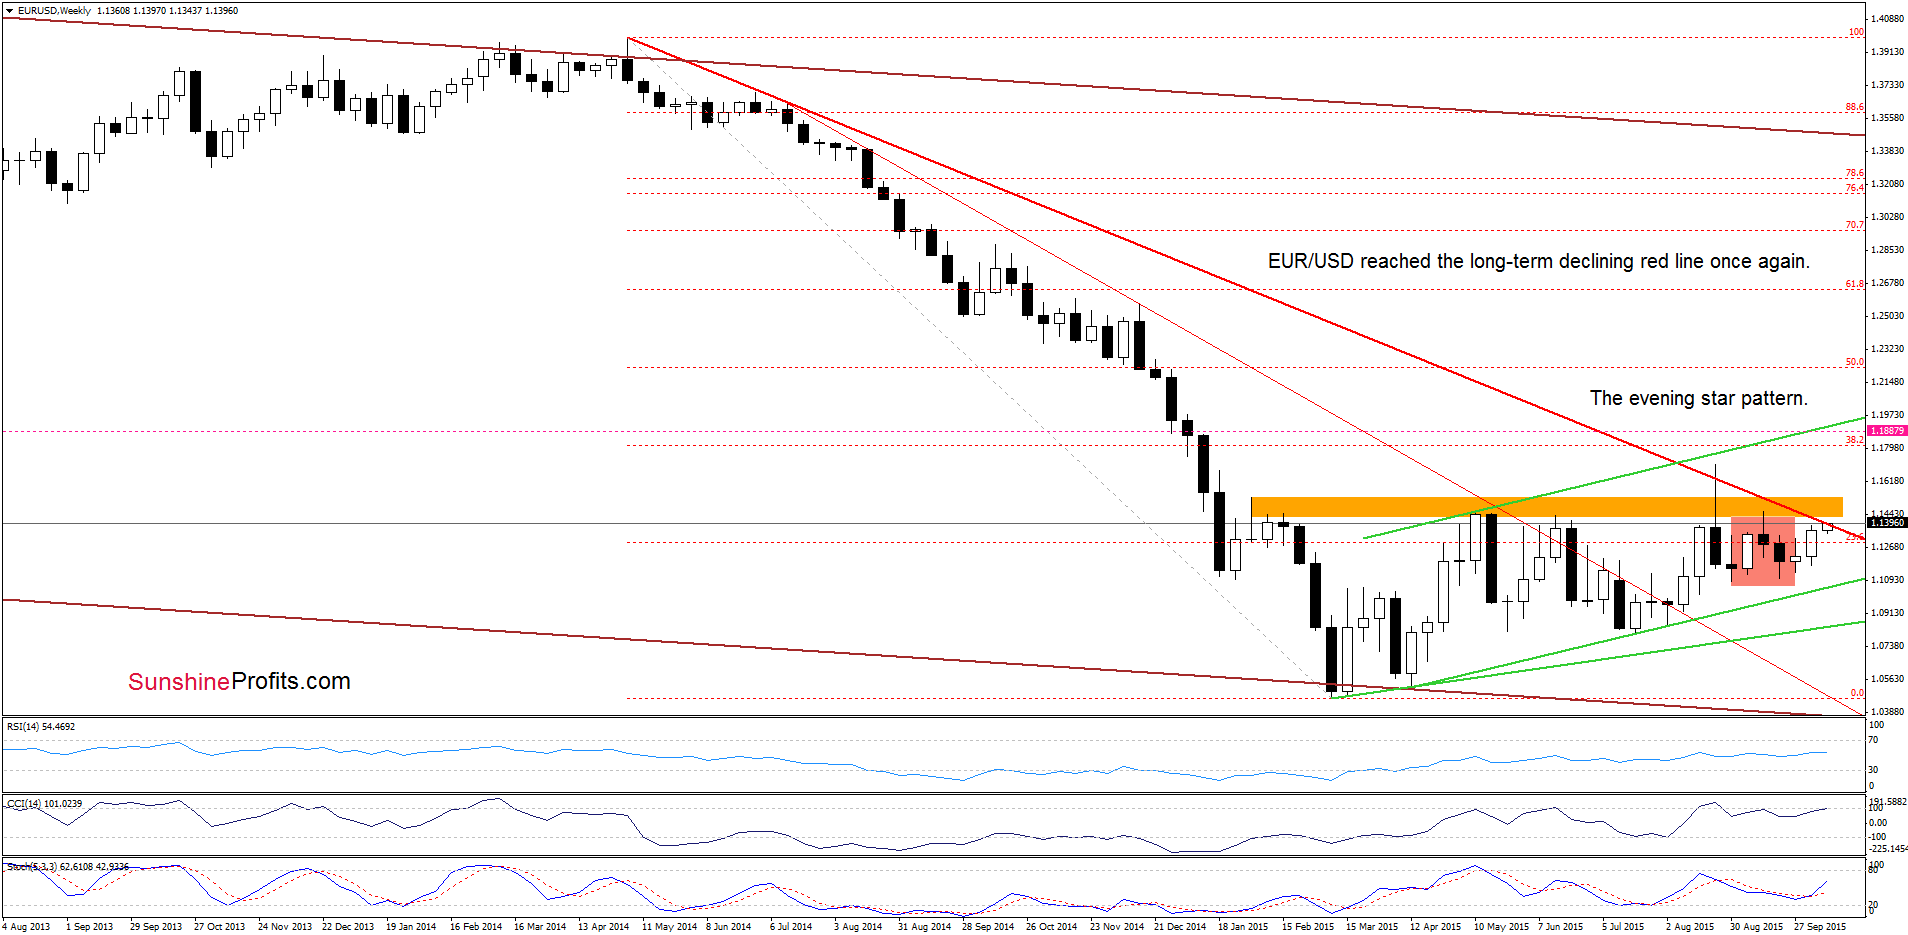 EUR/USD - the weekly chart